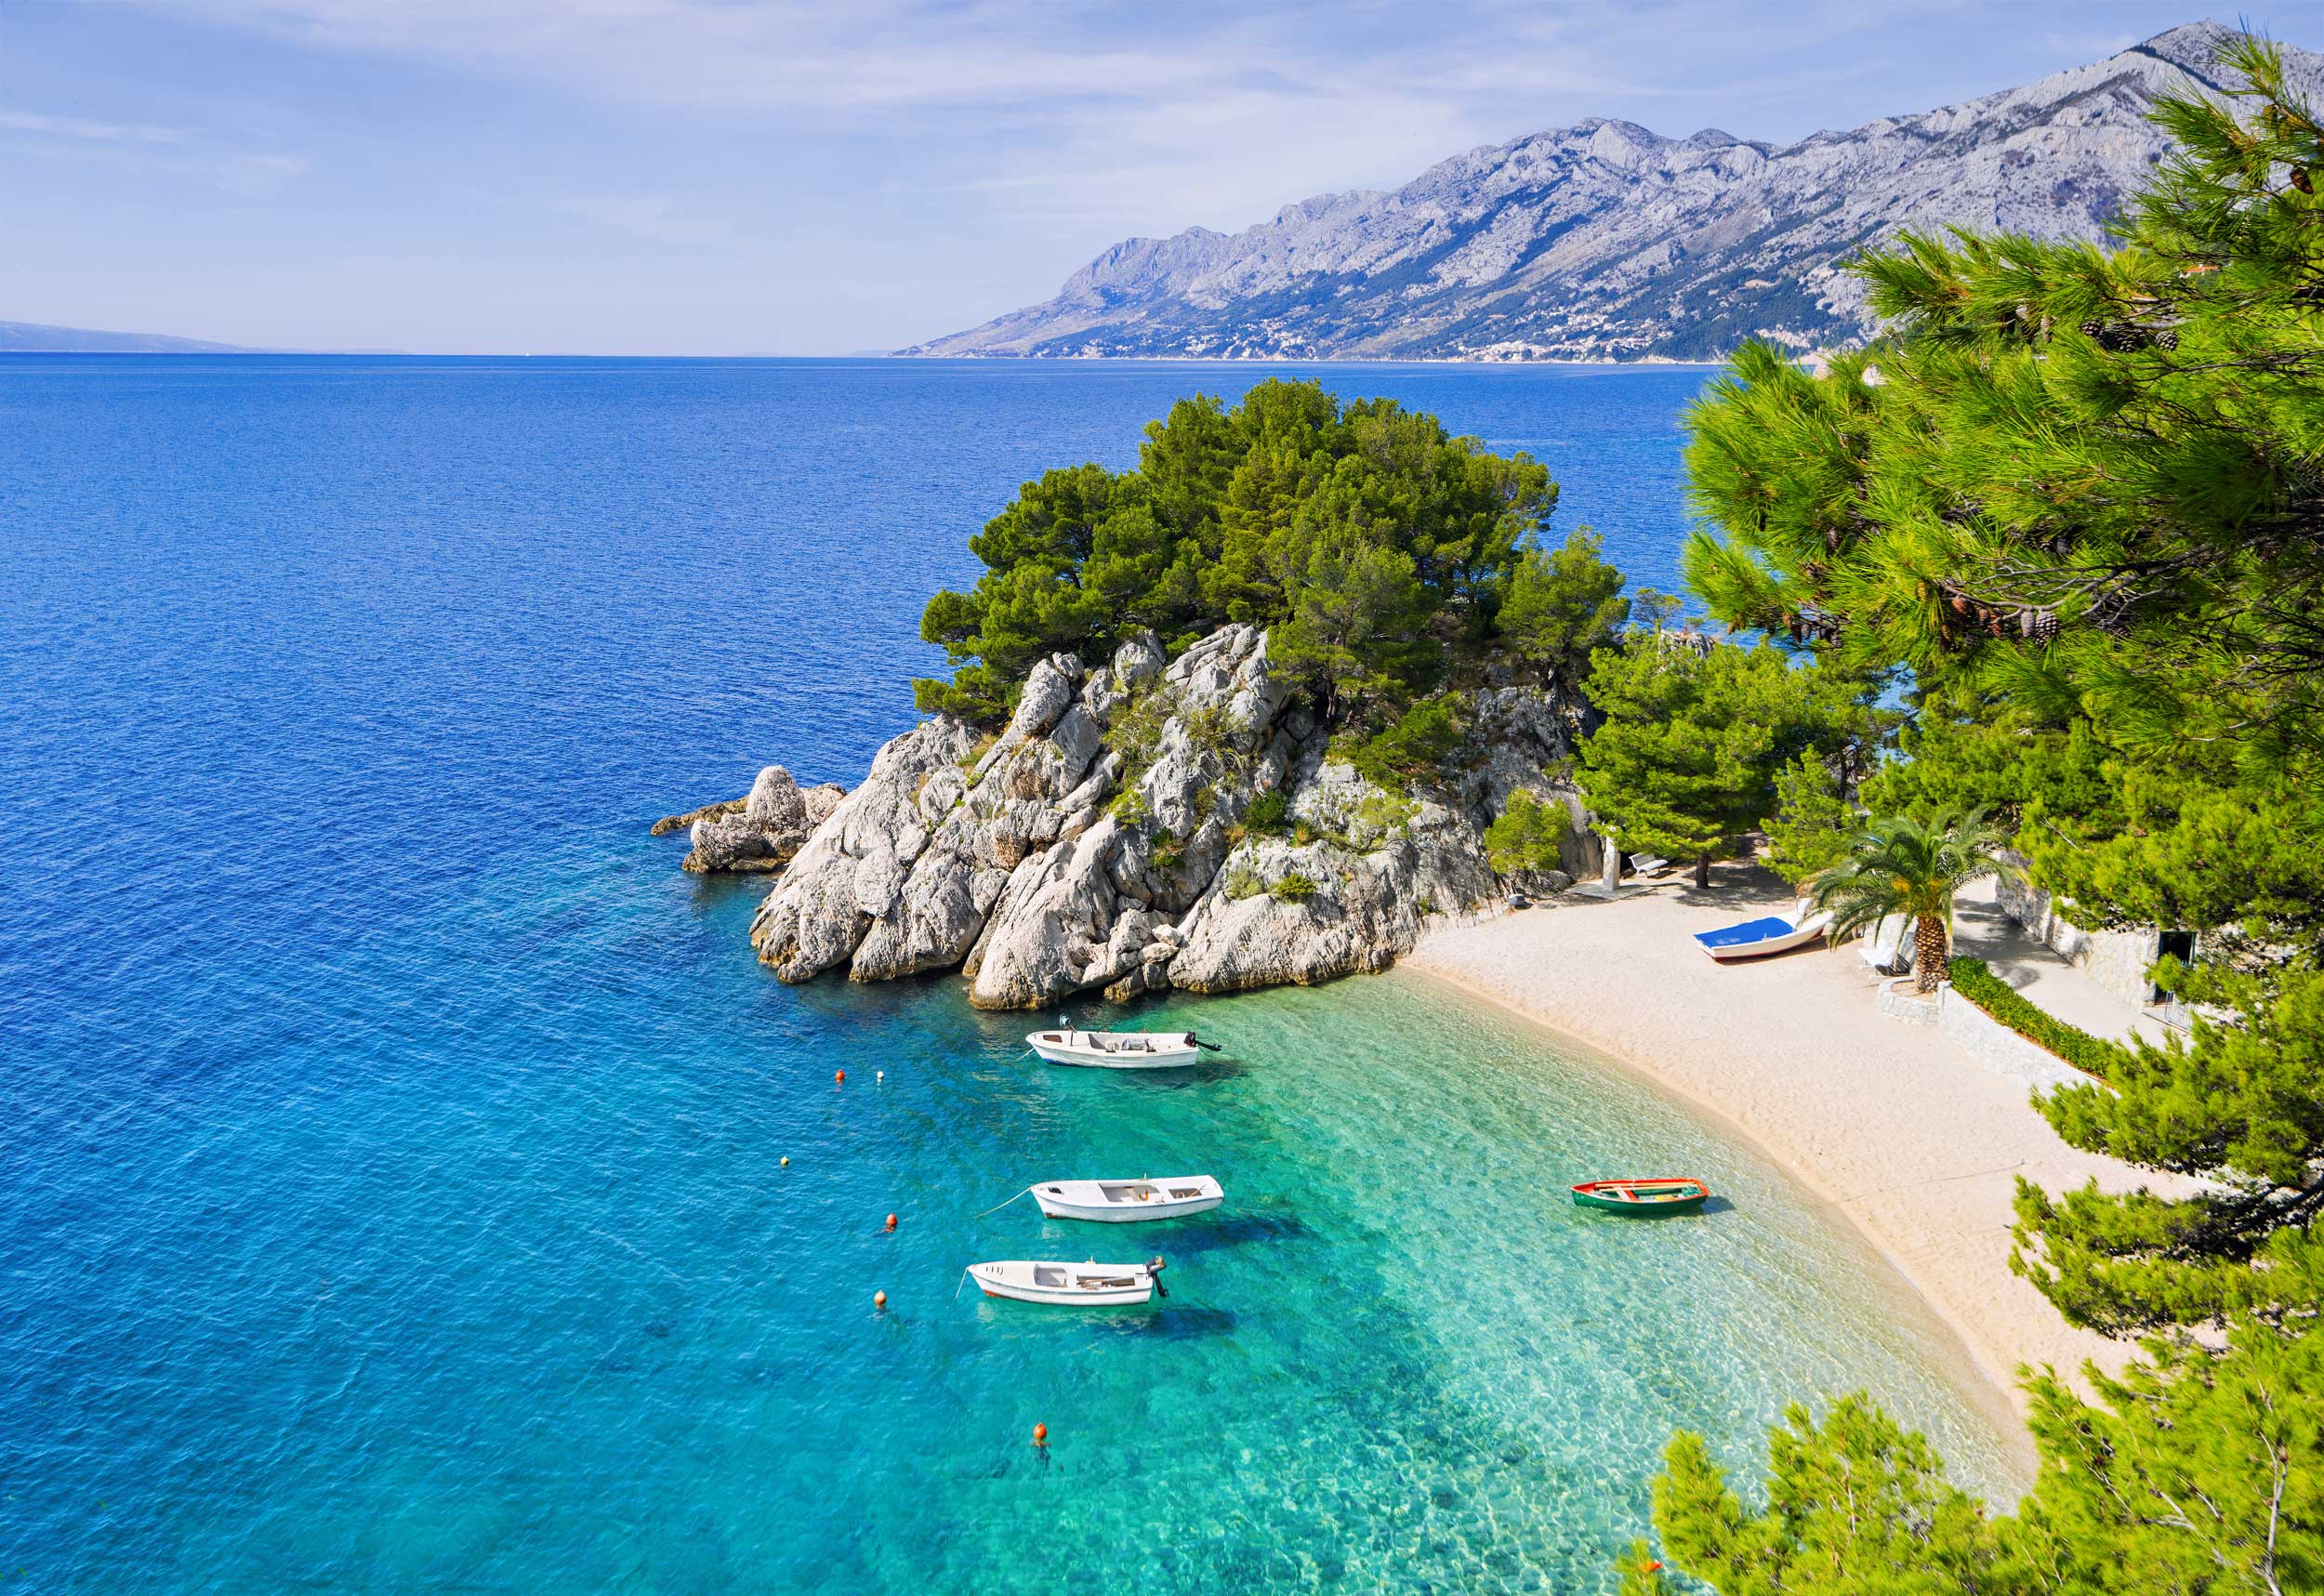 A small, sandy beach with four boats moored in clear blue water by it, Croatia